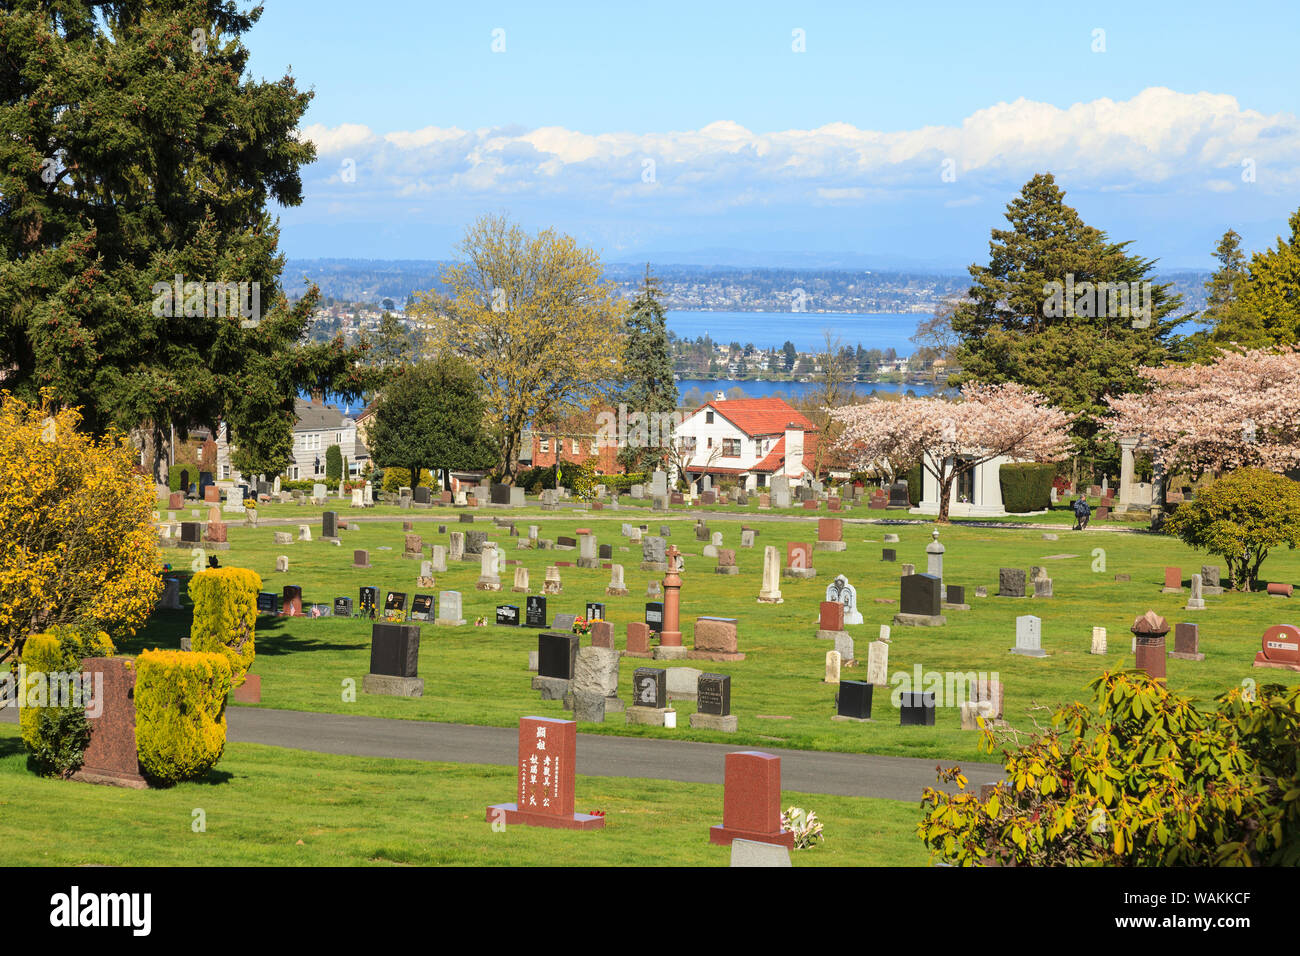 Lake View Cemetery, Capital Hill area of Seattle, Washington State Stock Photo